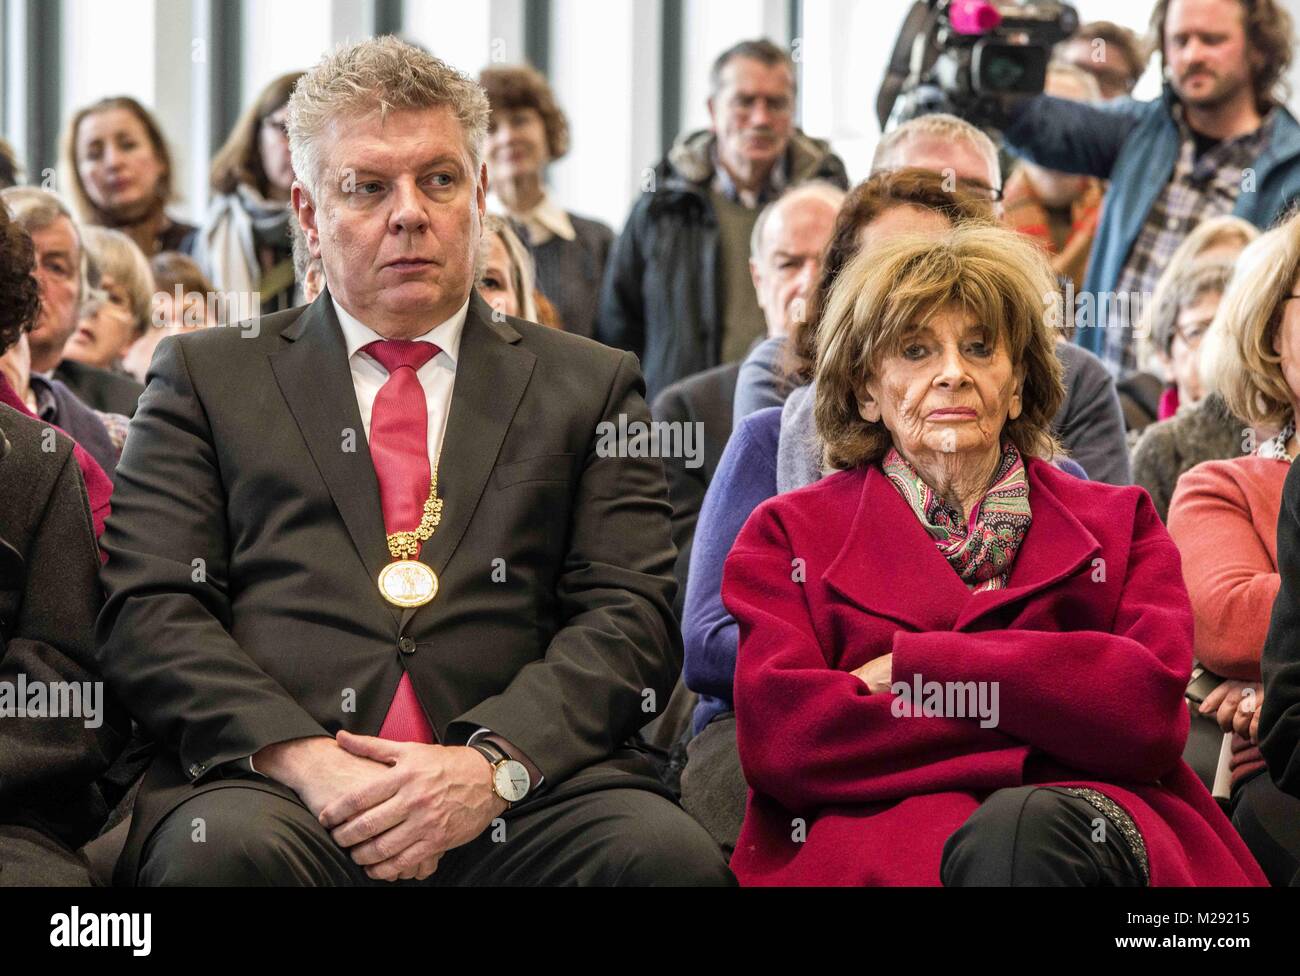 Munich, Bavaria, Germany. 6th Feb, 2018. Munich Mayor Dieter Reiter seated next to Holocaust survivor Charlotte Knoblauch. The City of Munich, Germany dedicated the plaza adjacent to the National Socialism Documentation Center (NS-Dokumentationszentrum) building to Holocaust survivor Max Mannheimer. Mannheimer was an author, painter, and prolific speaker about the experience. He and his brother were the only family members to survive. Credit: ZUMA Press, Inc./Alamy Live News Stock Photo